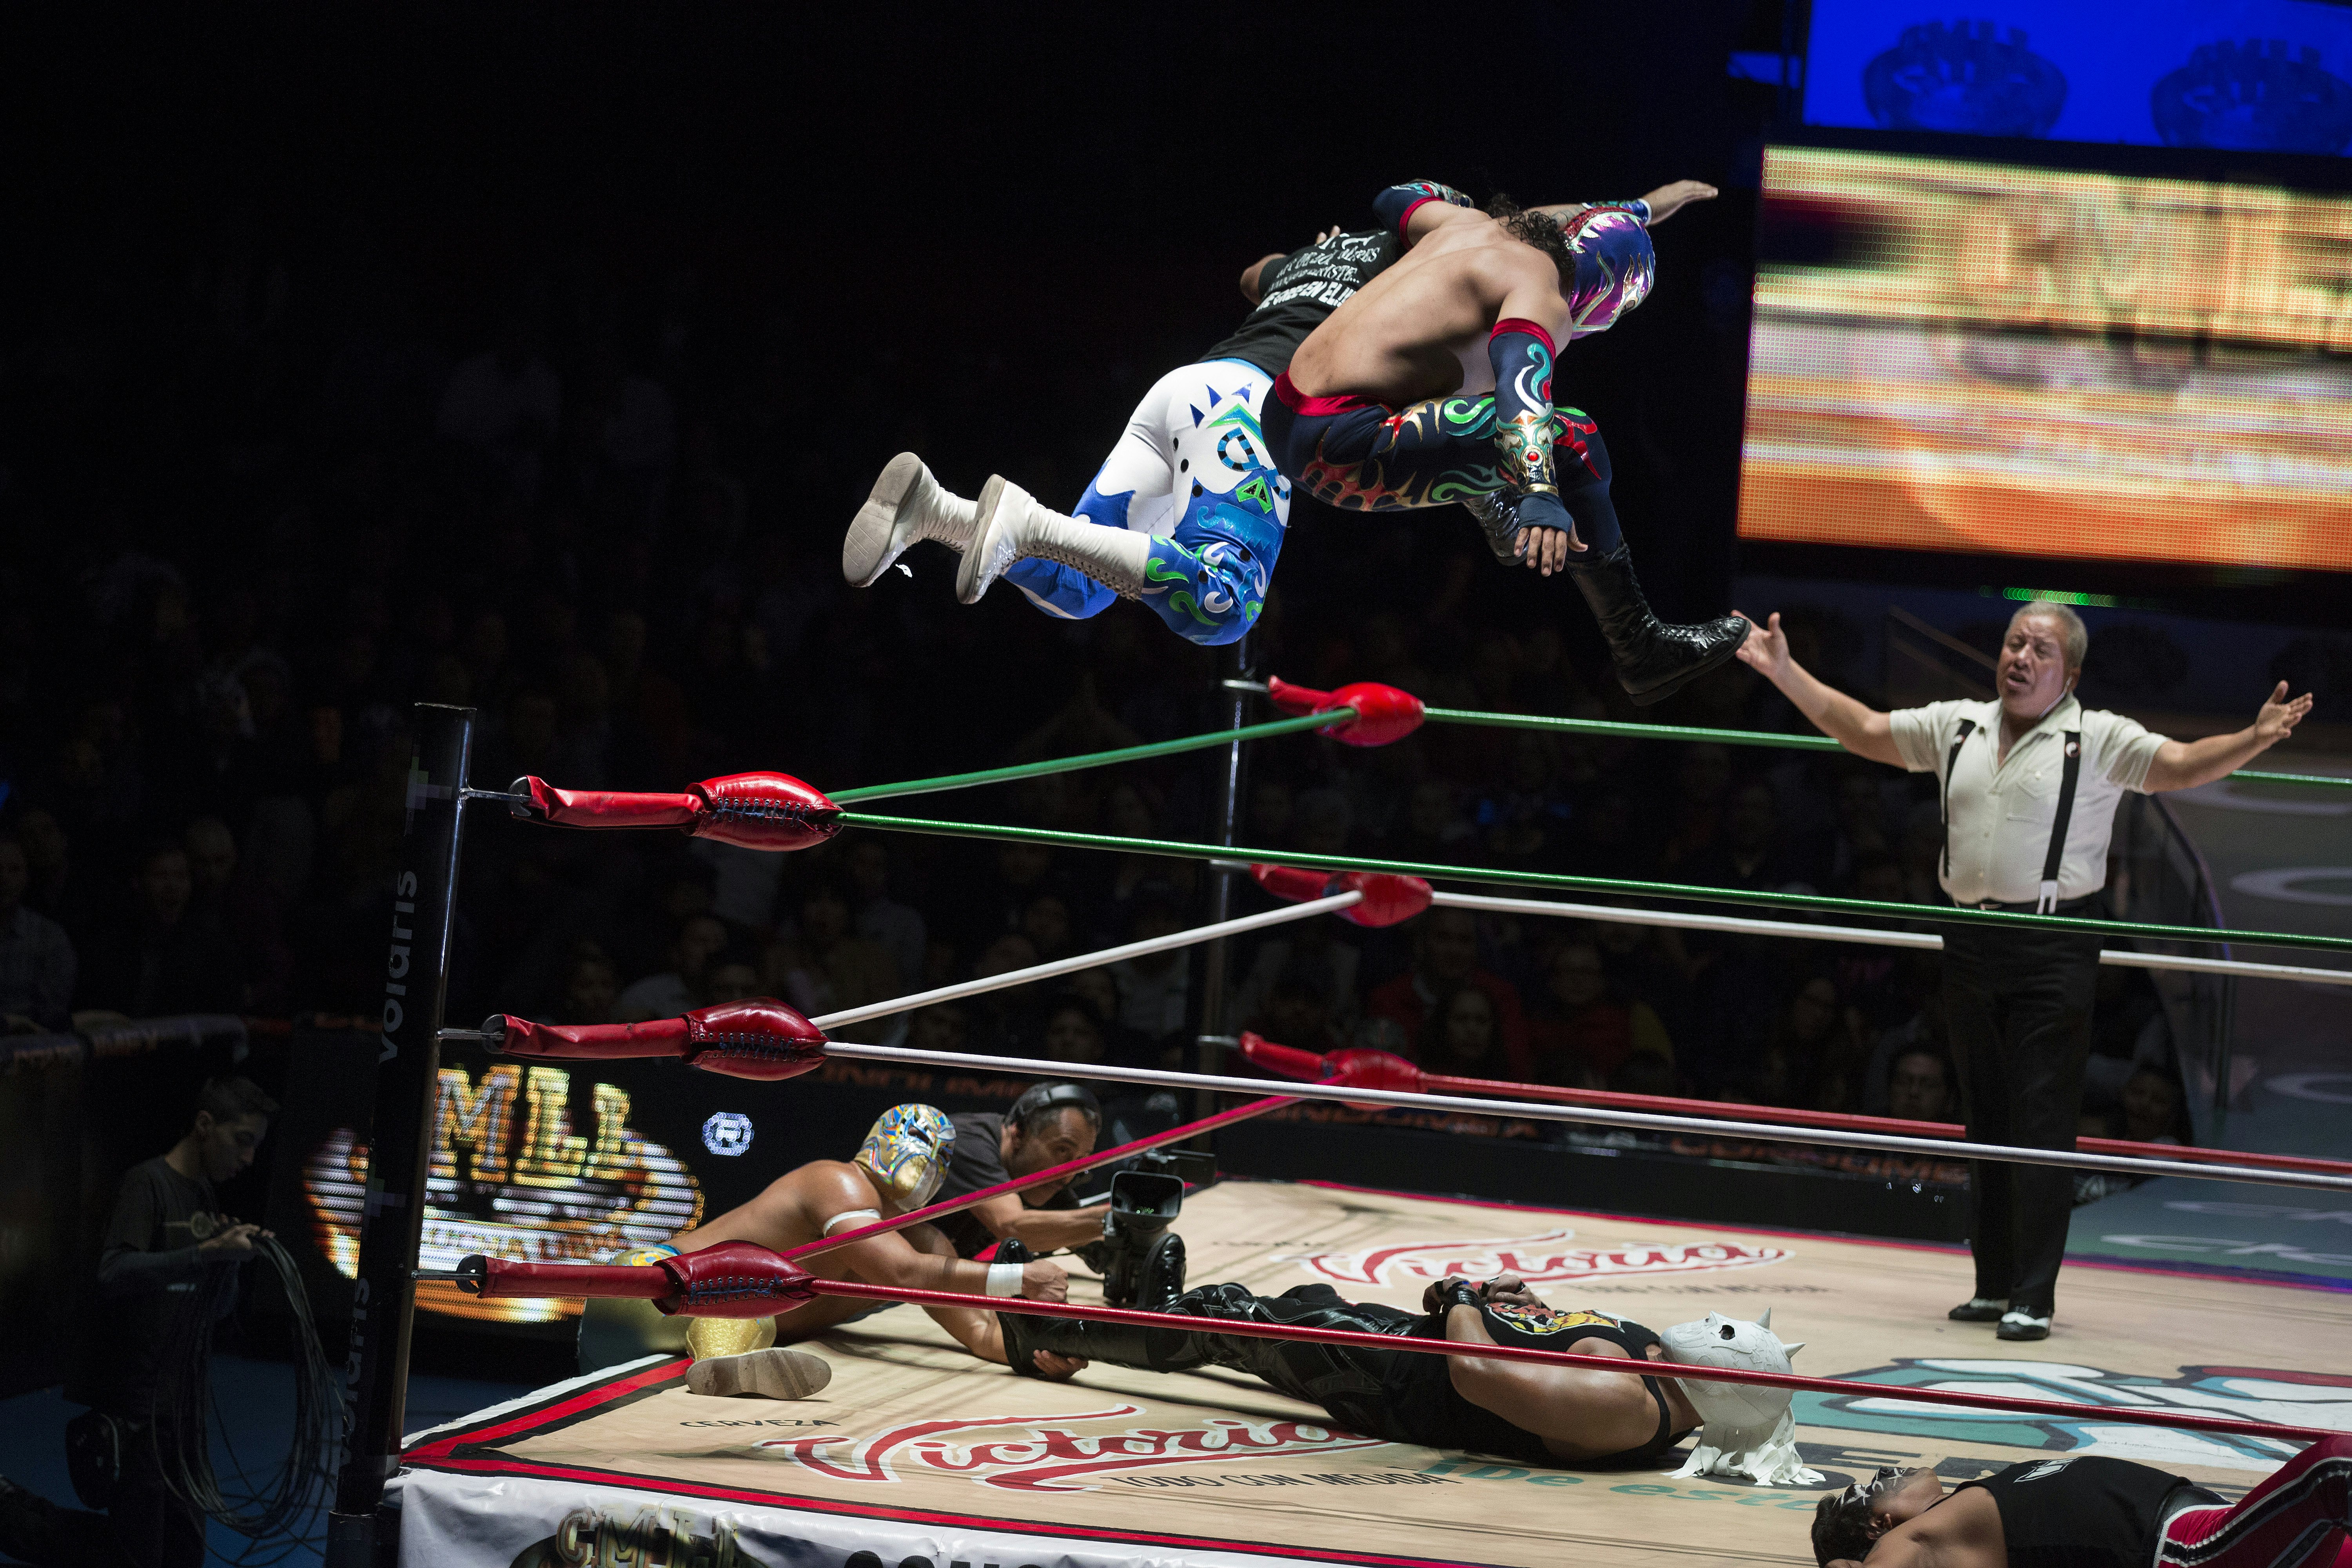 Two wrestlers go airborne off the top belt of the wrestling ring as another wrestler lays sprawled out on the mat. There's a ref with his arms spread in the background